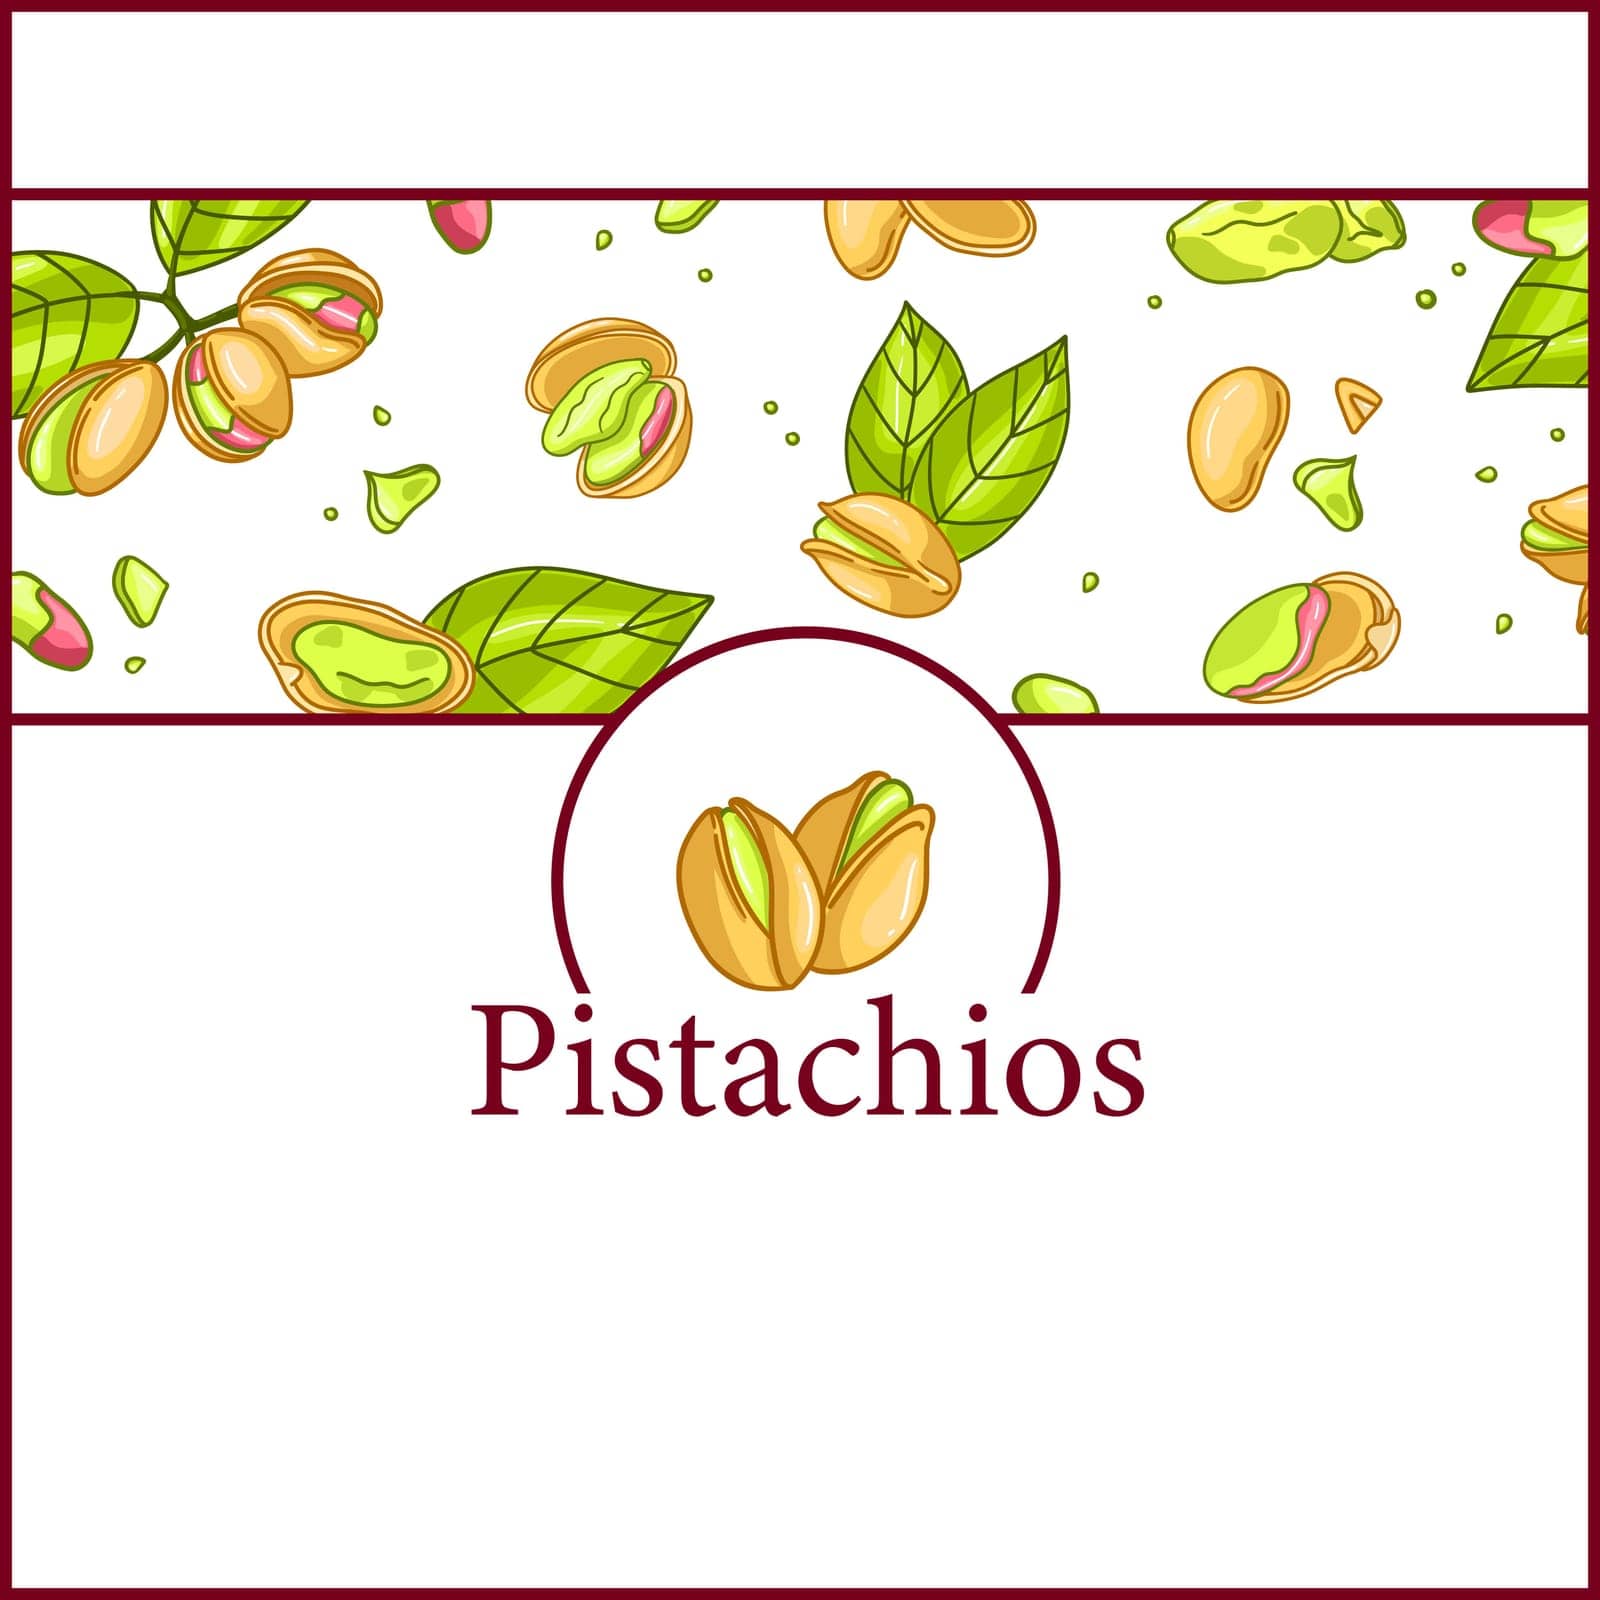 Pistachio frame line menu poster. Vector illustration in hand drawing style. Healthy food ingredient template for vegetarian diet. Retro autumn decoration with leaves, nuts, branches banner